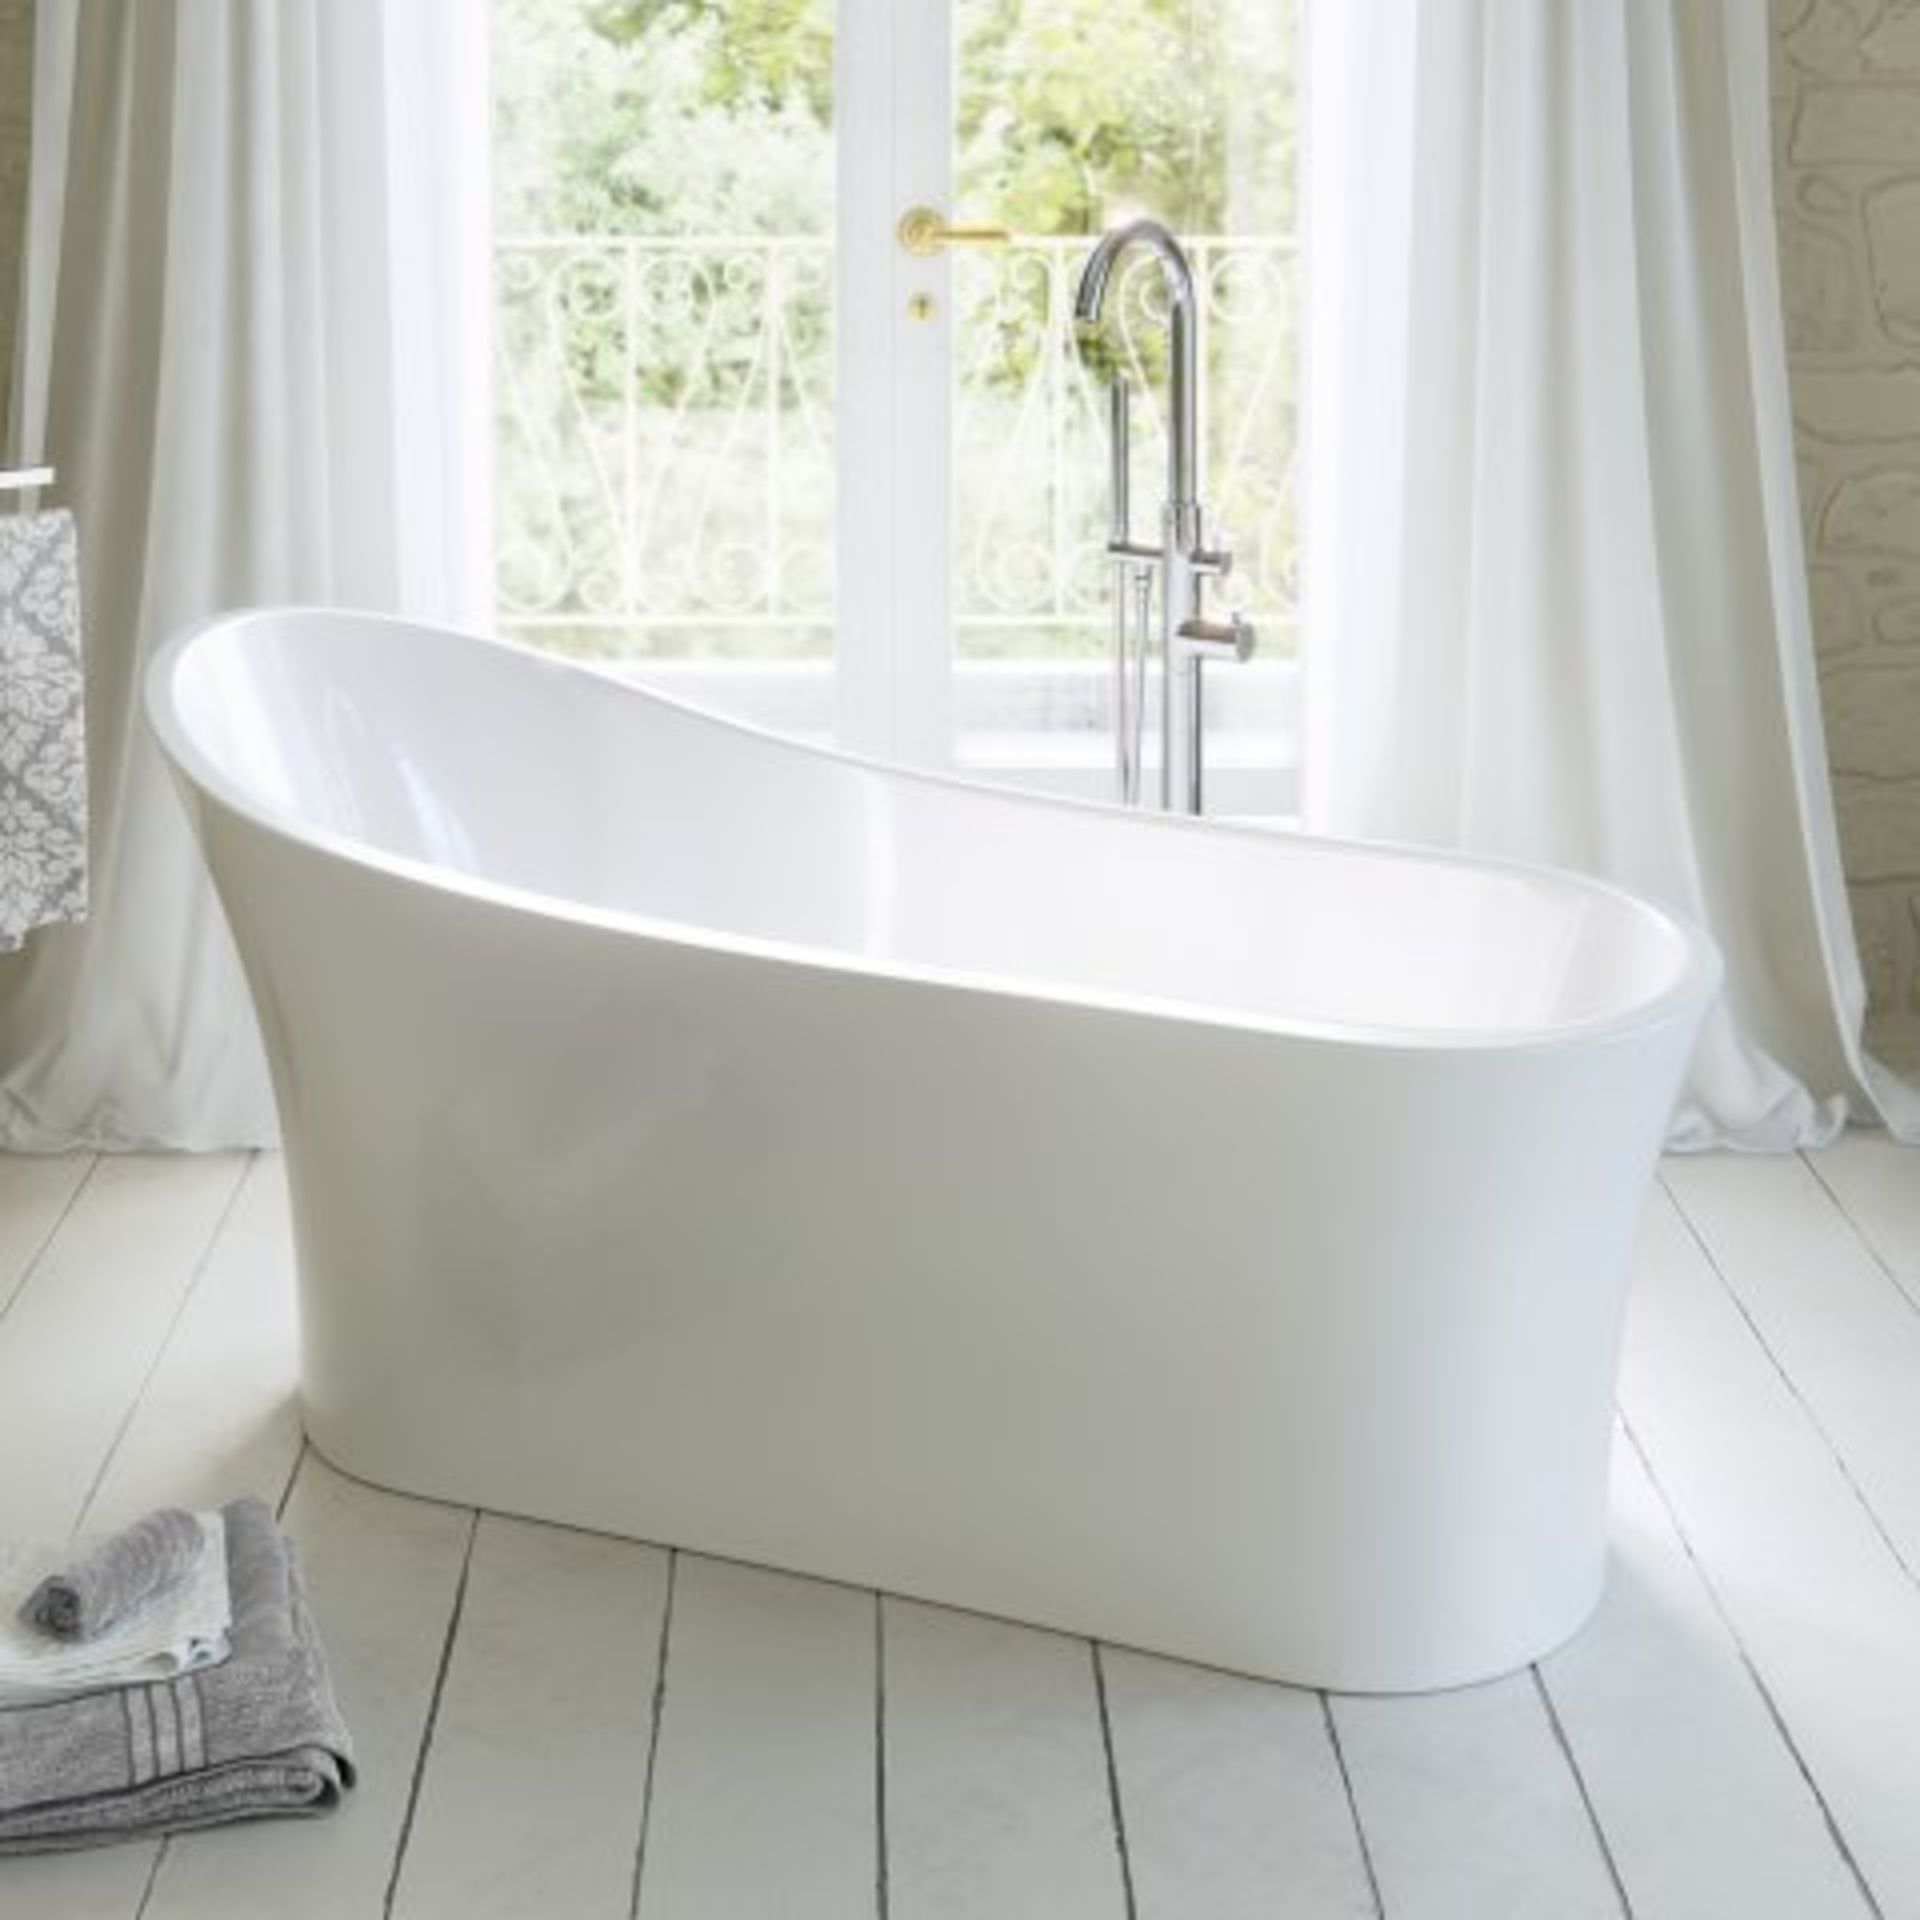 New (K3) 1650 x 690mm Madison Freestanding Bath - Large. RRP £2,499. This Gloss White Free-Sta...